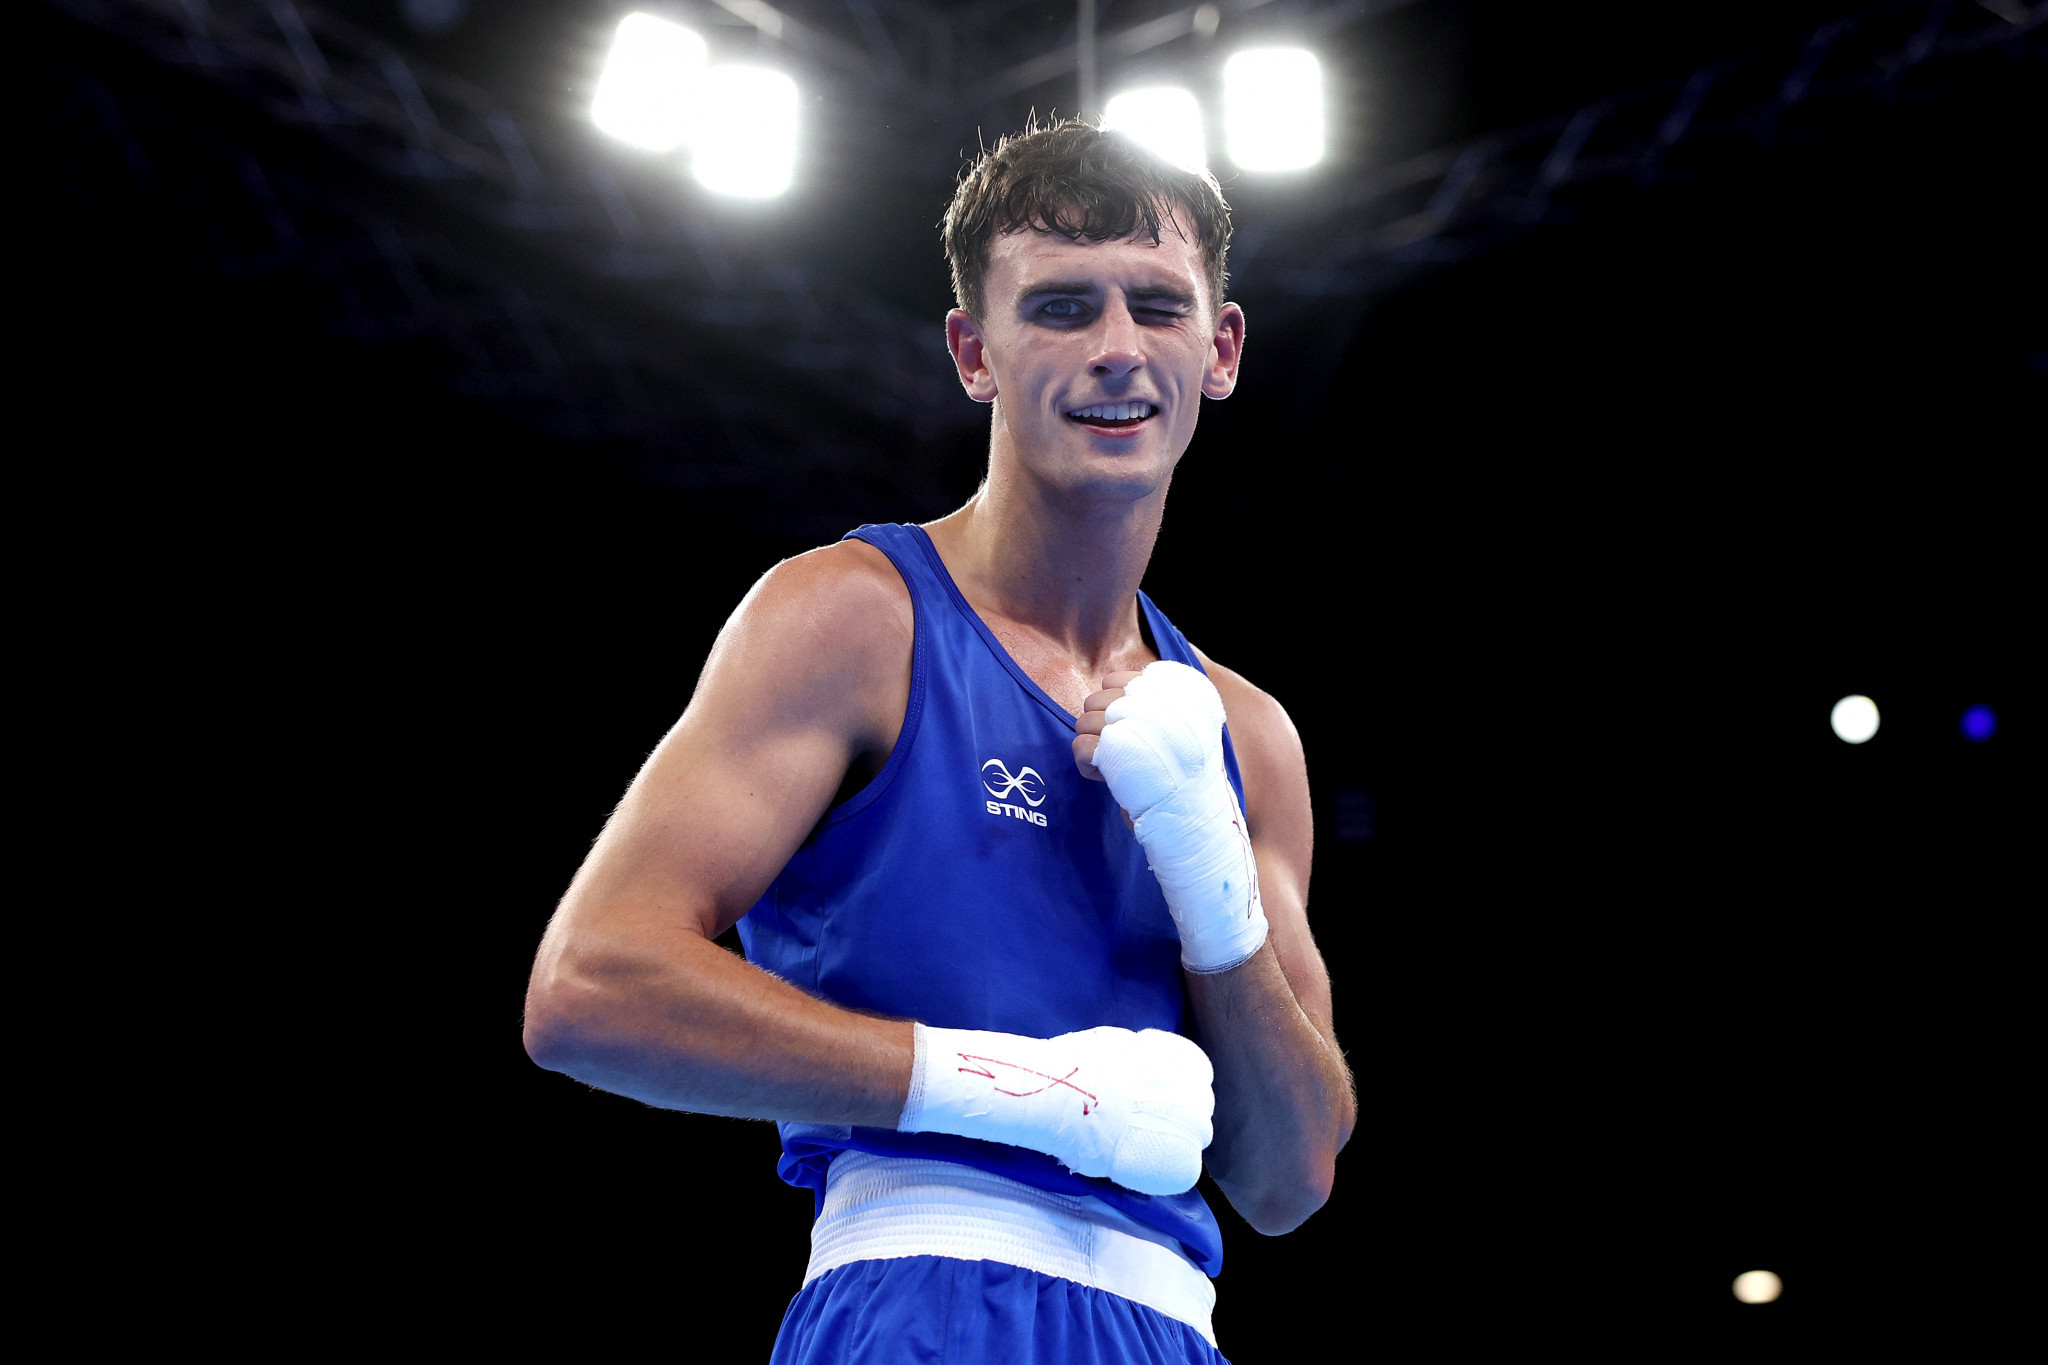 Home nations boxers secure medals at Birmingham 2022 Commonwealth Games